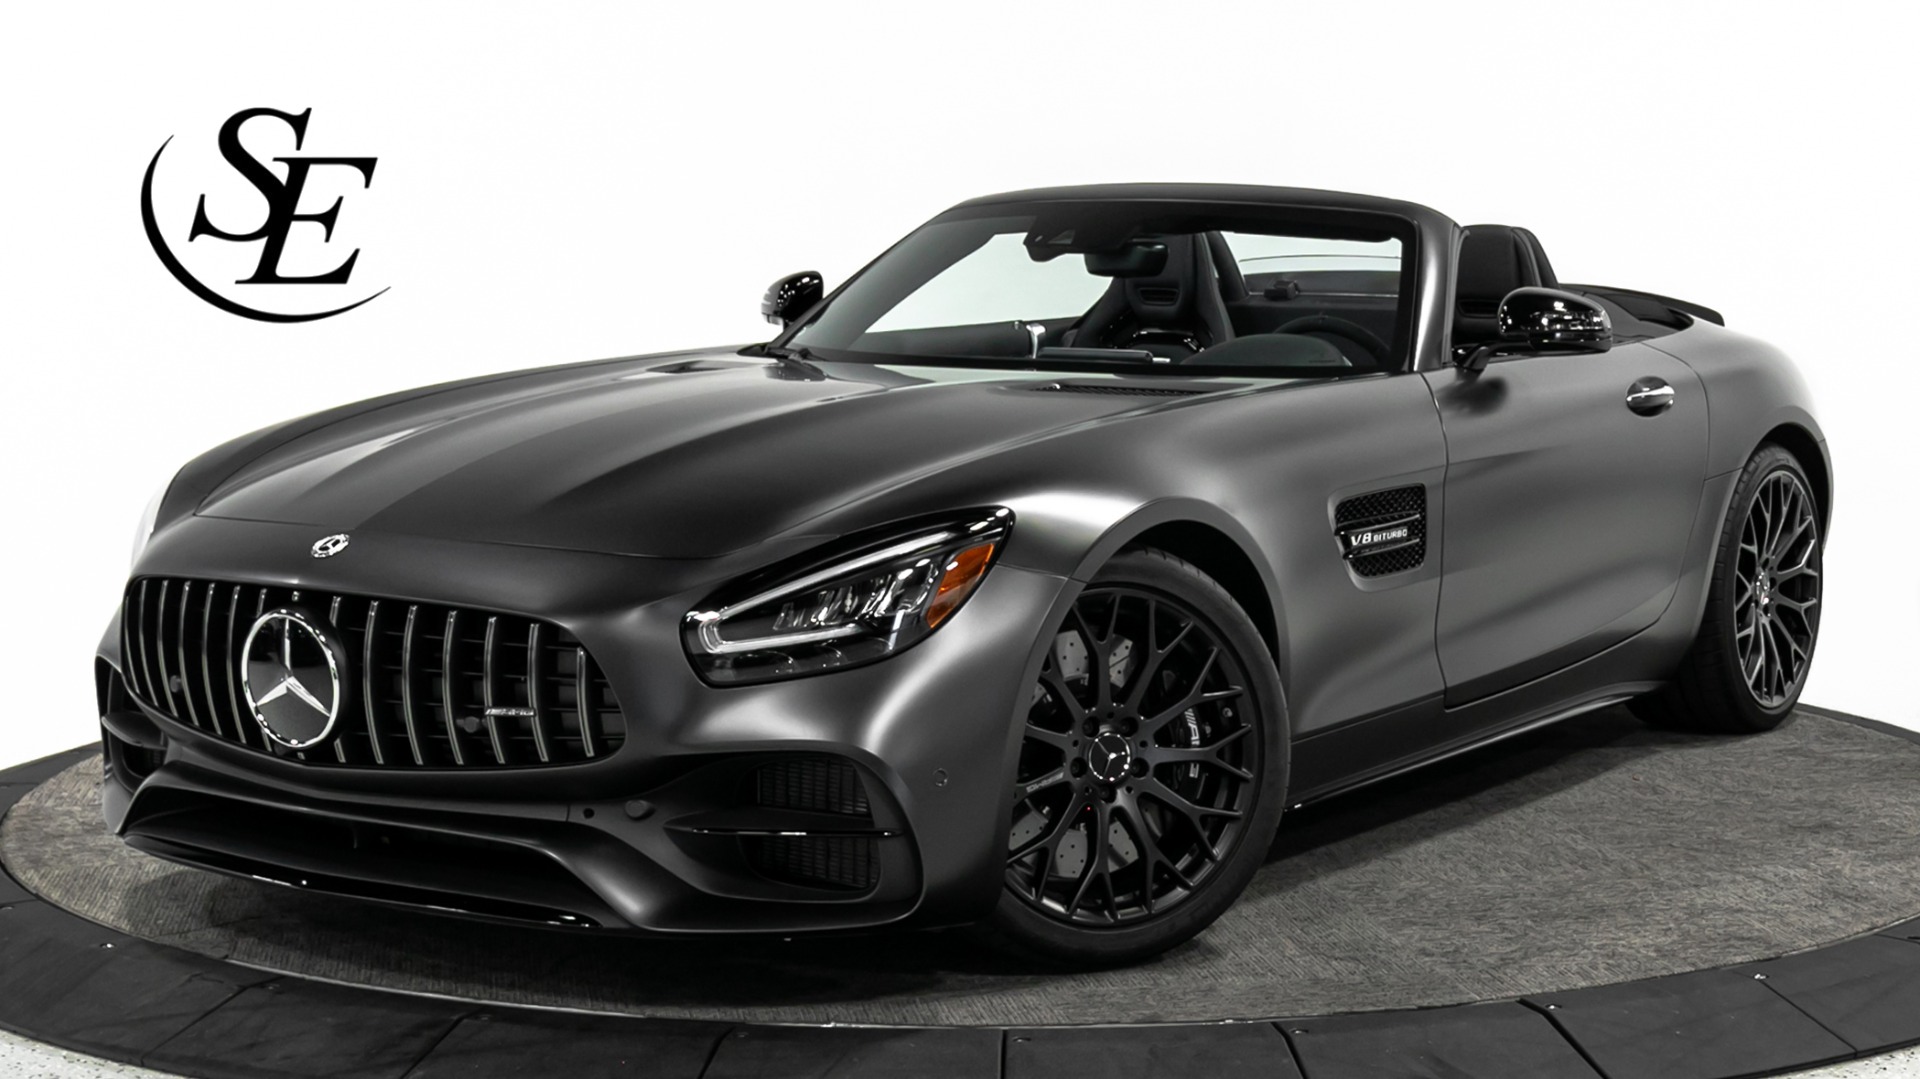 2021 Mercedes-AMG GT Stealth Edition Review: A Road Trip